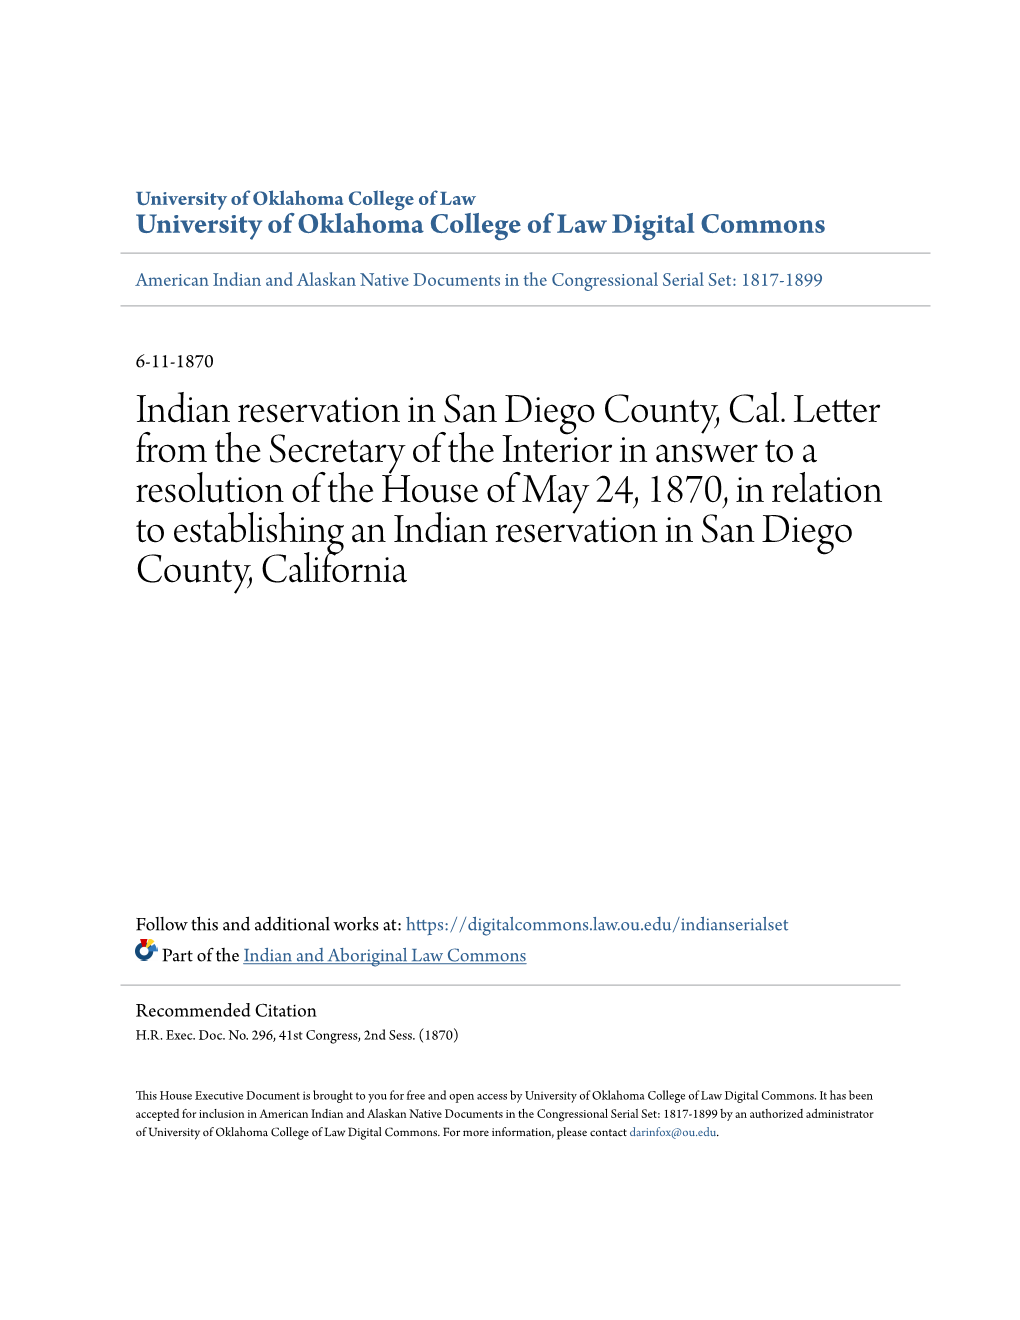 Indian Reservation in San Diego County, Cal. Letter from The